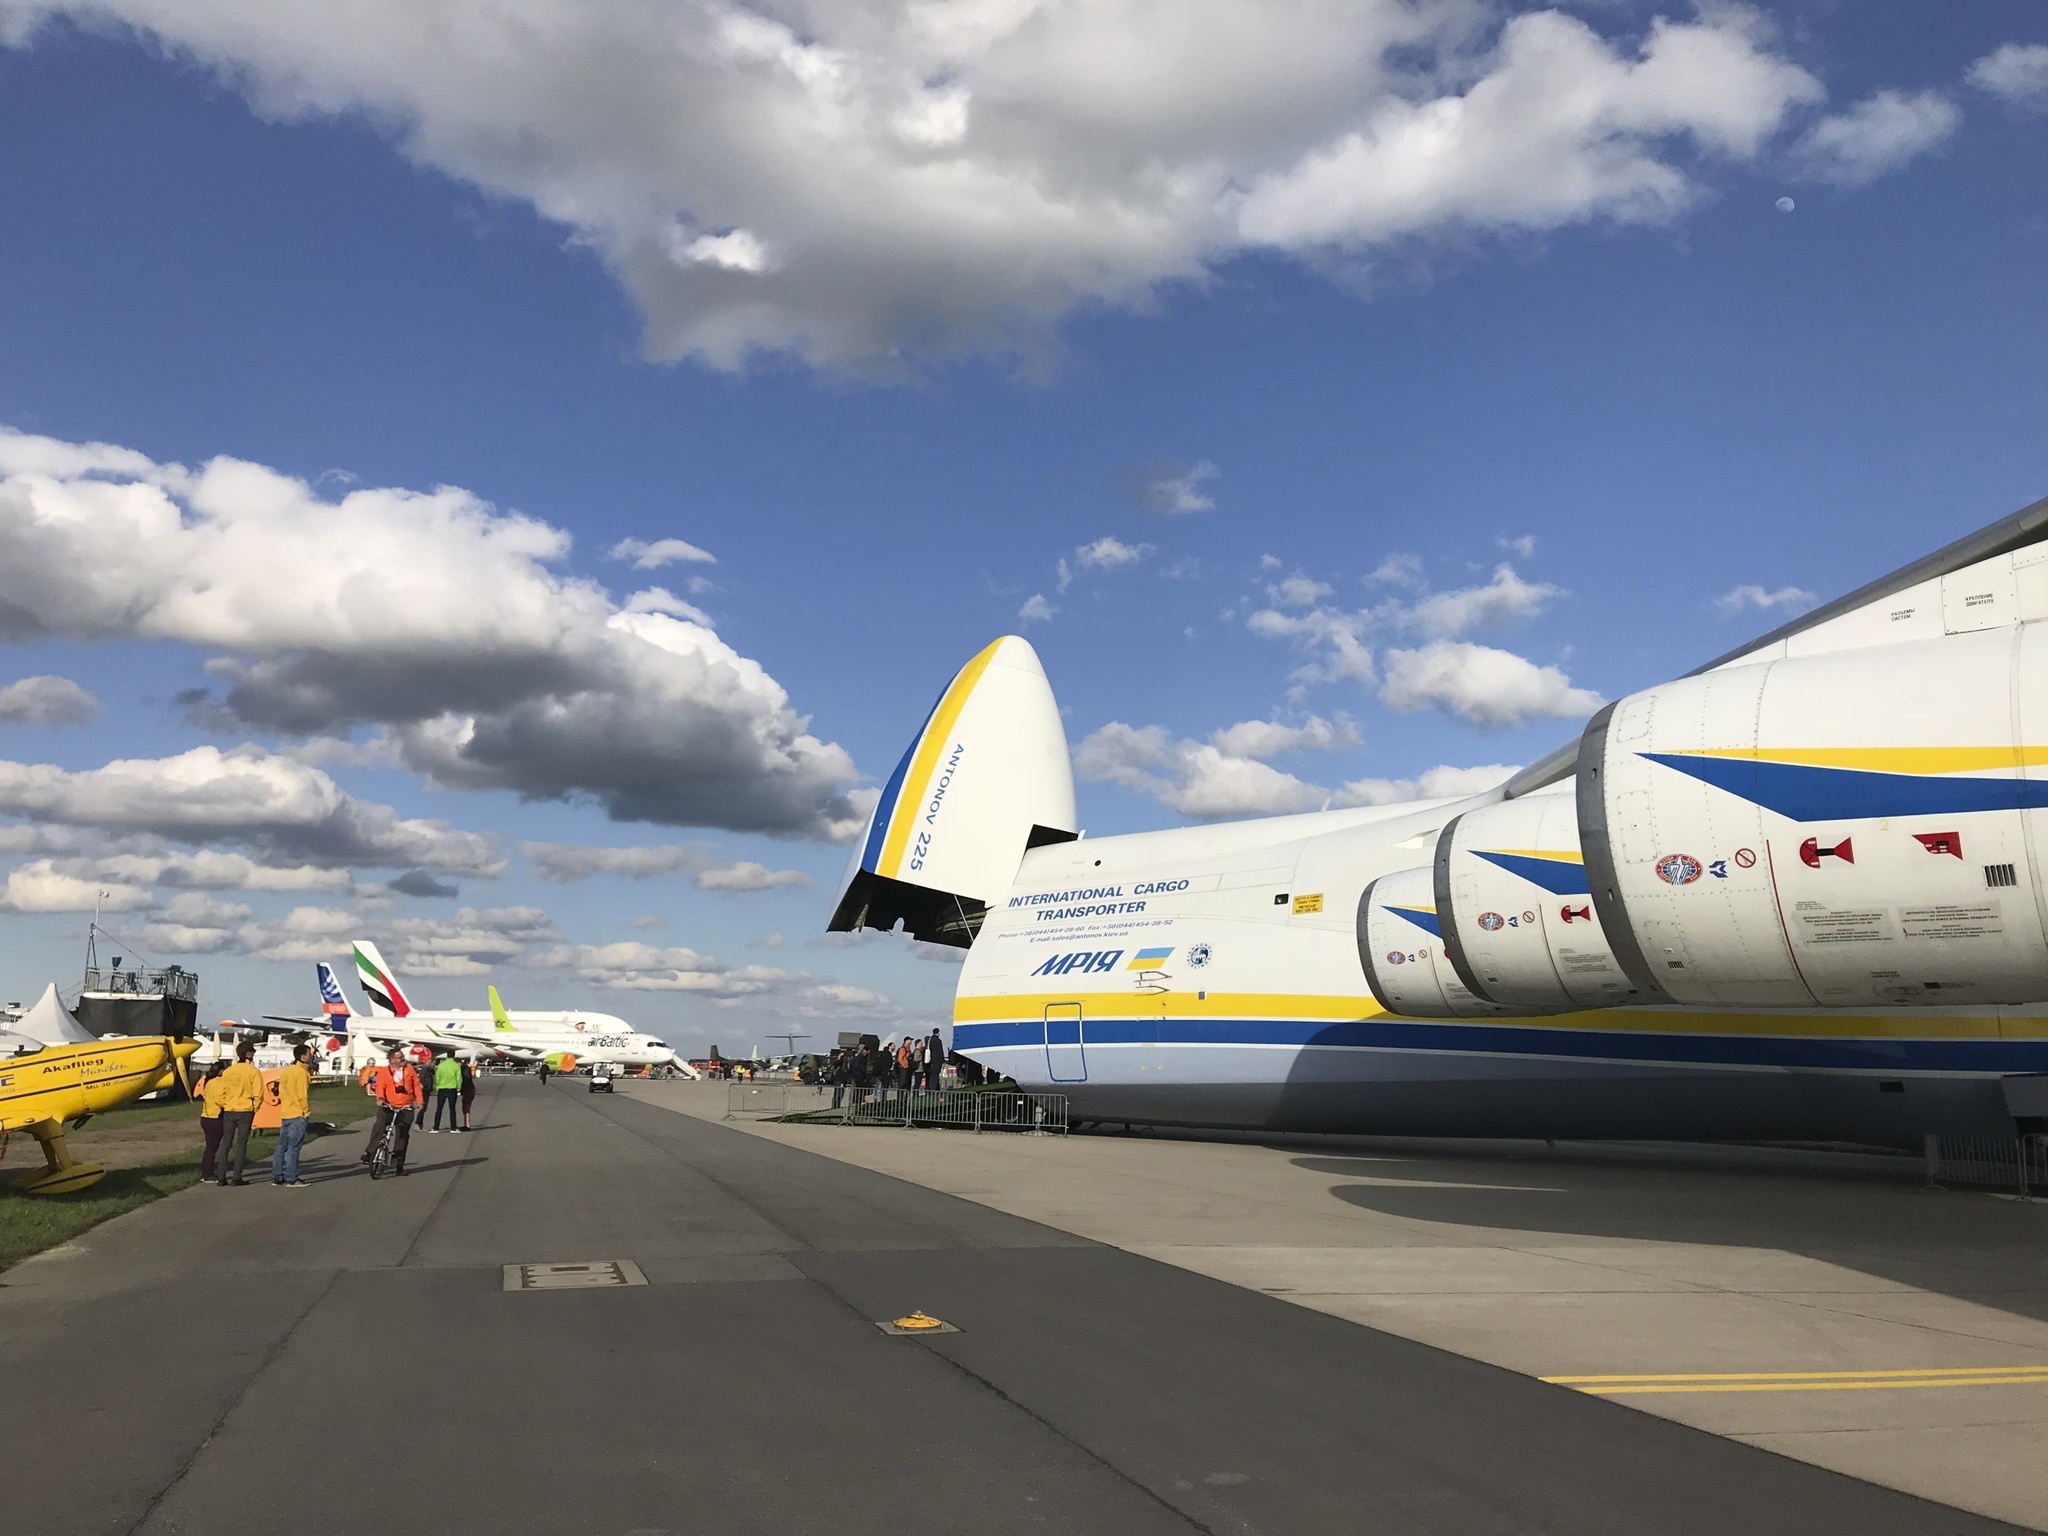 ANTONOV COMPANY LANDS WORLDS LARGEST AIRCRAFT IN BERLIN